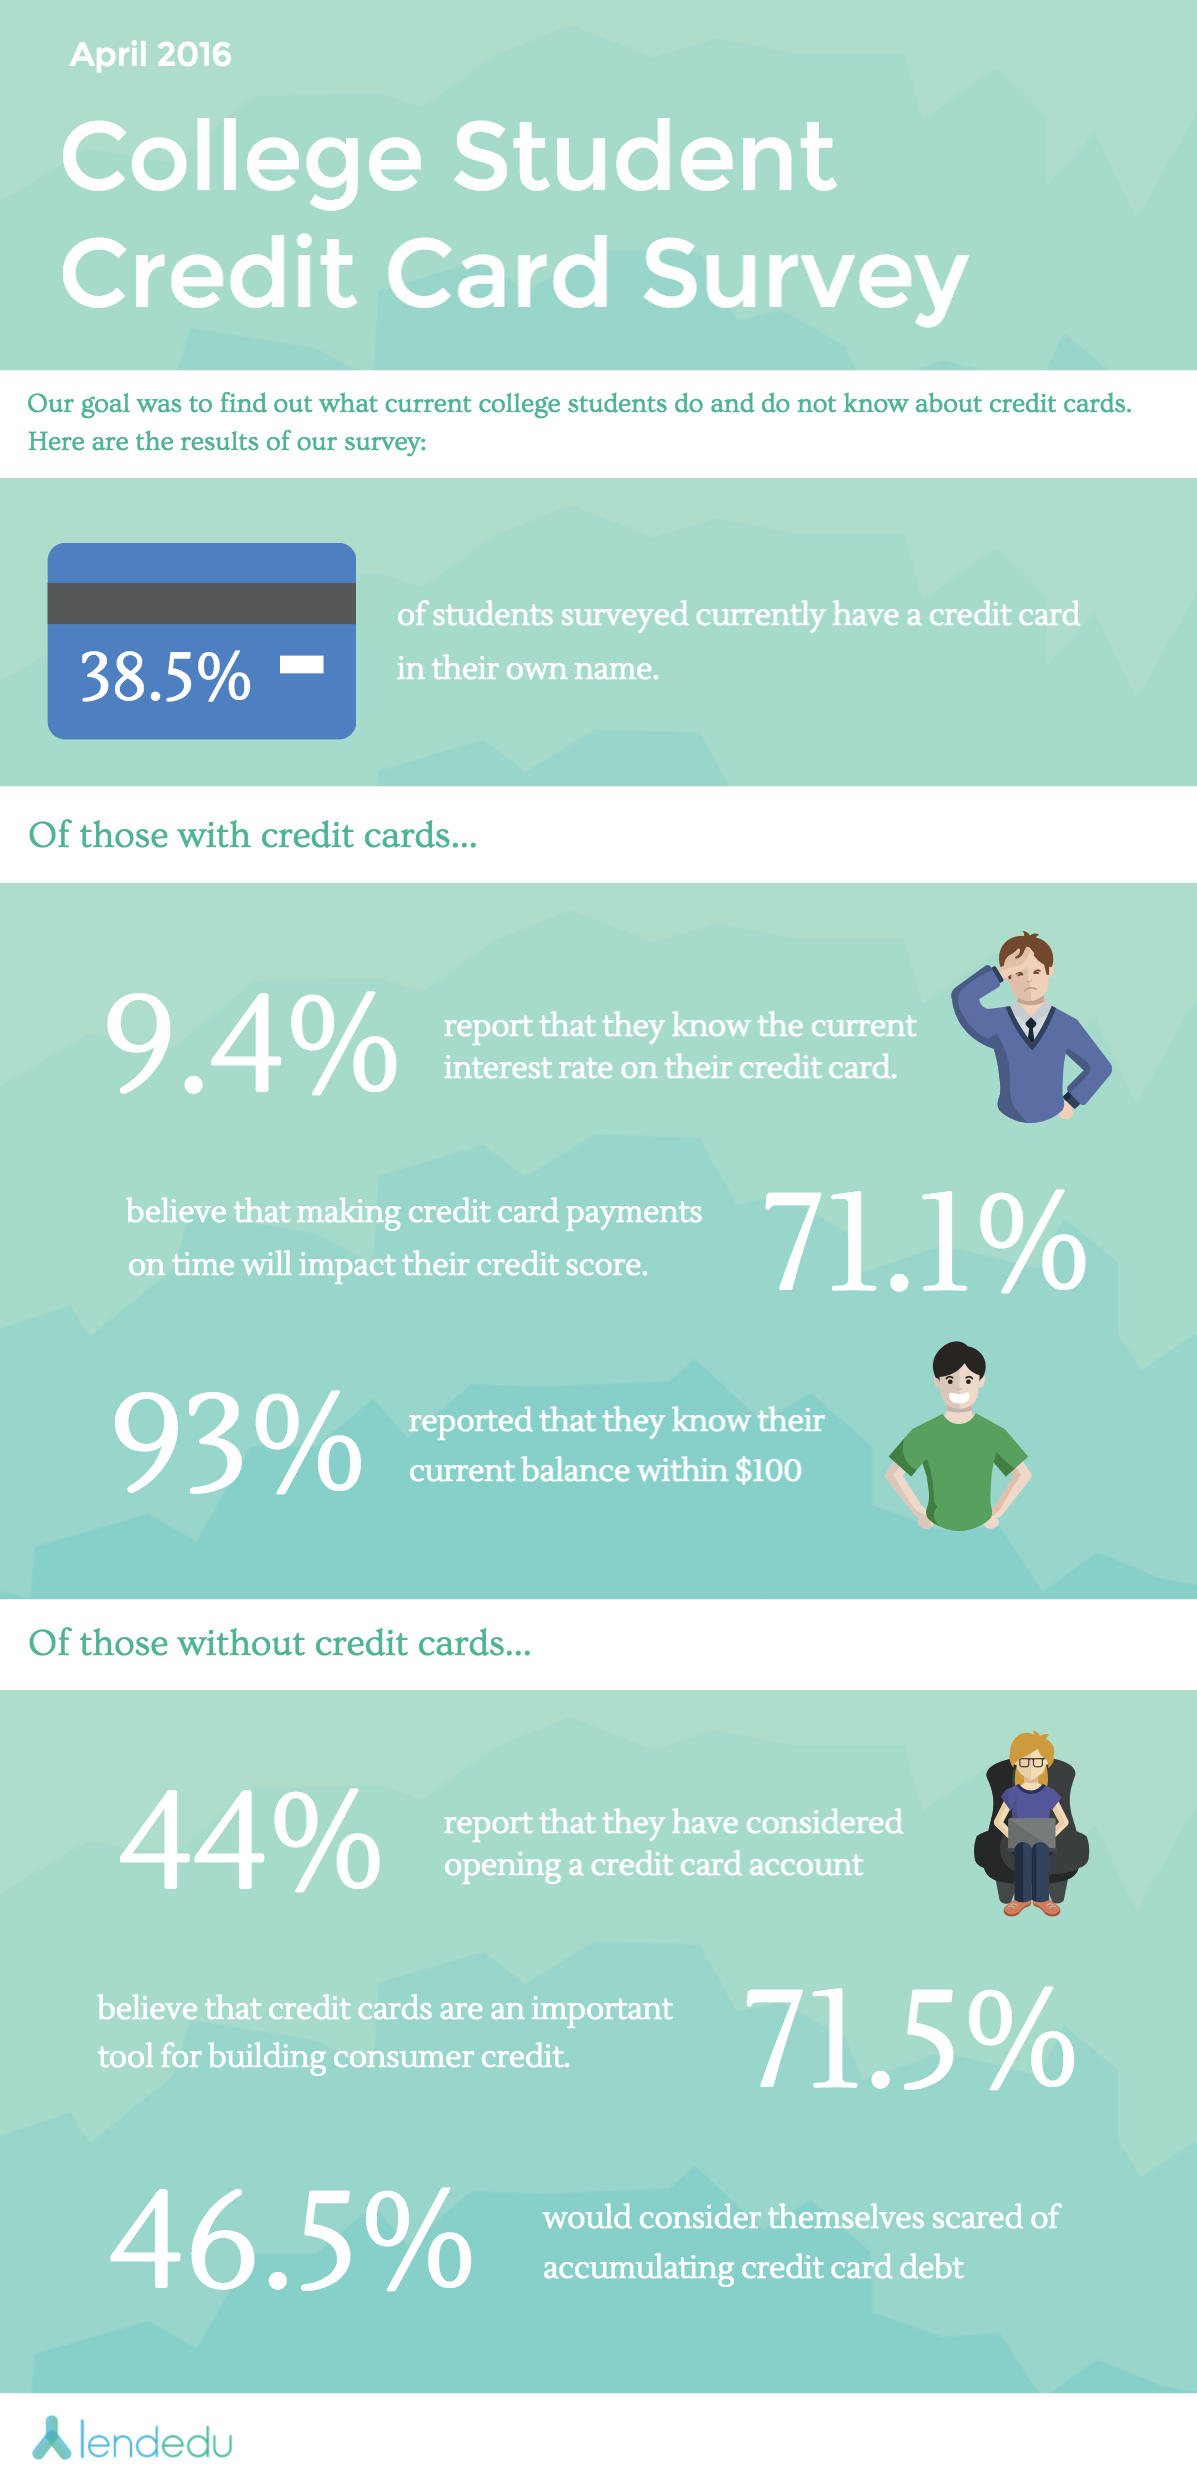 What is a good credit score for a college student?